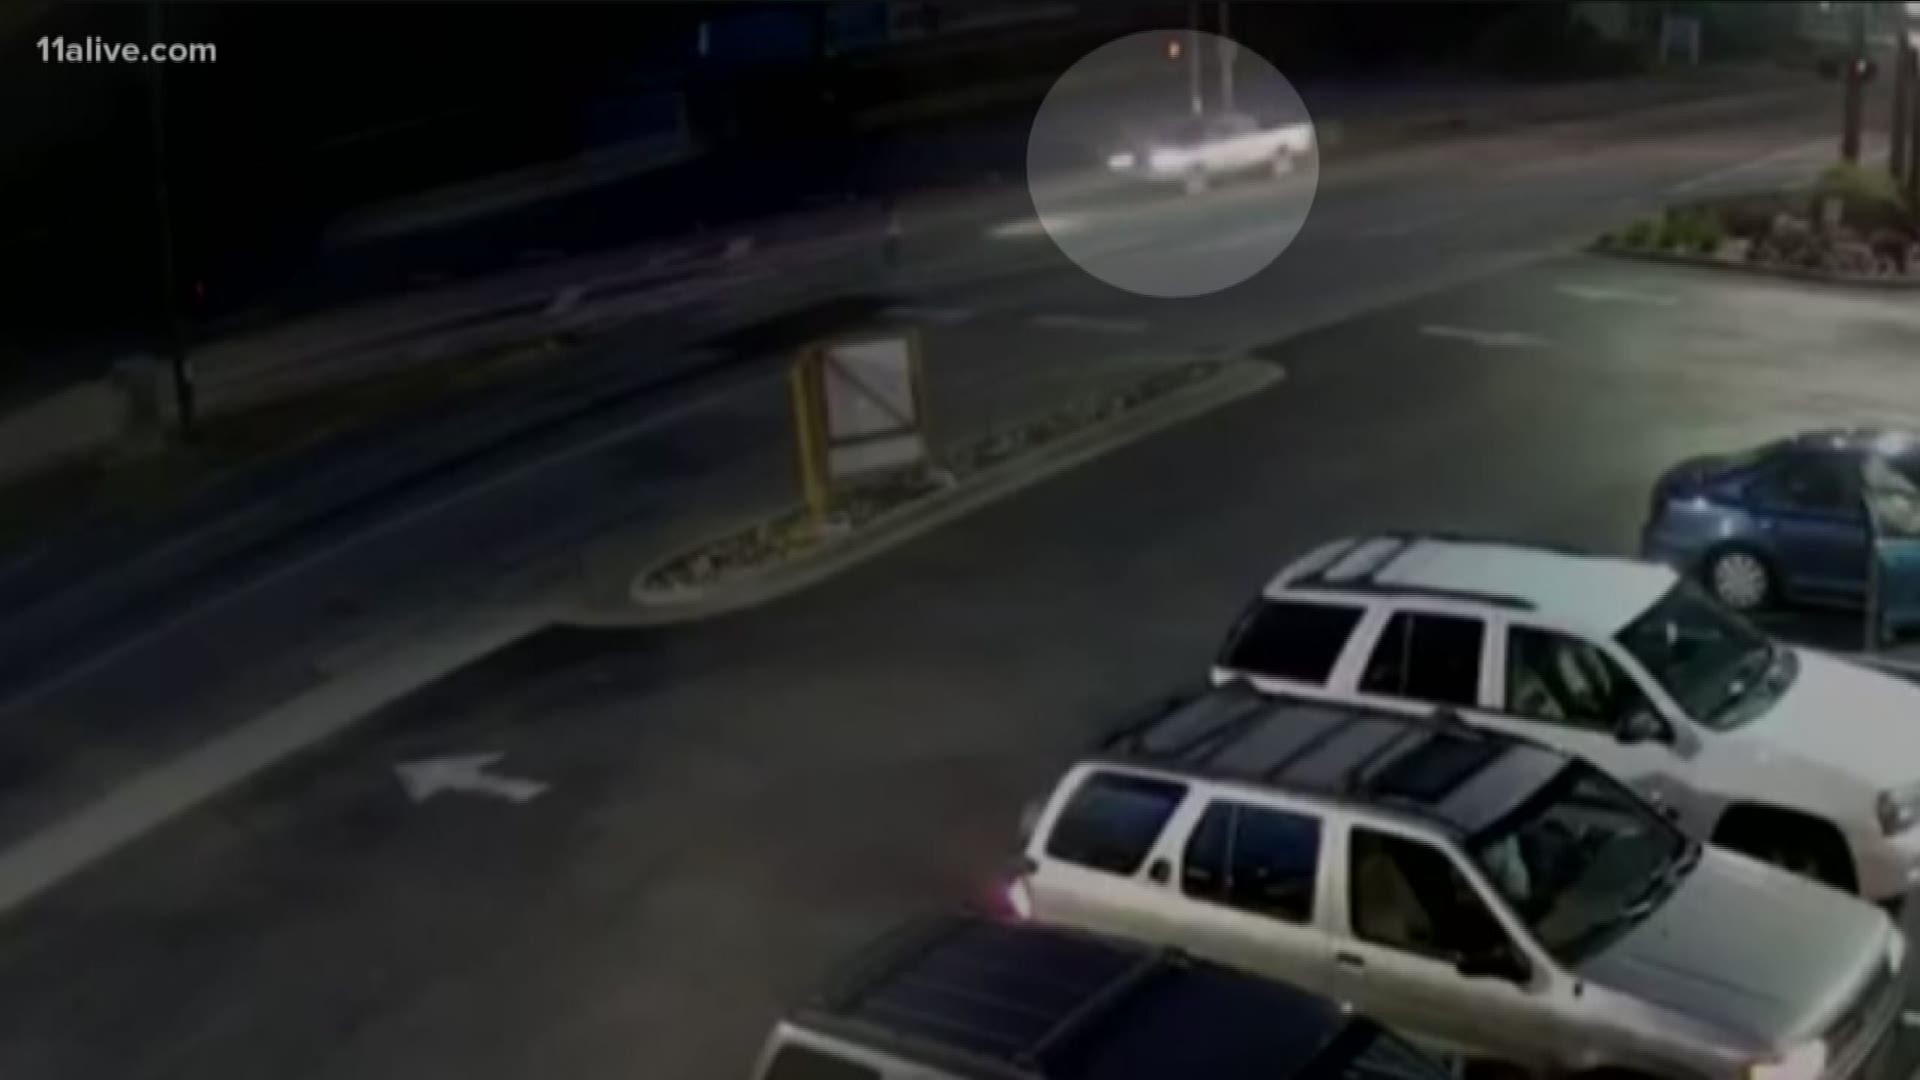 Police are on the lookout for a truck caught on camera striking a woman at an intersection on Friday night.